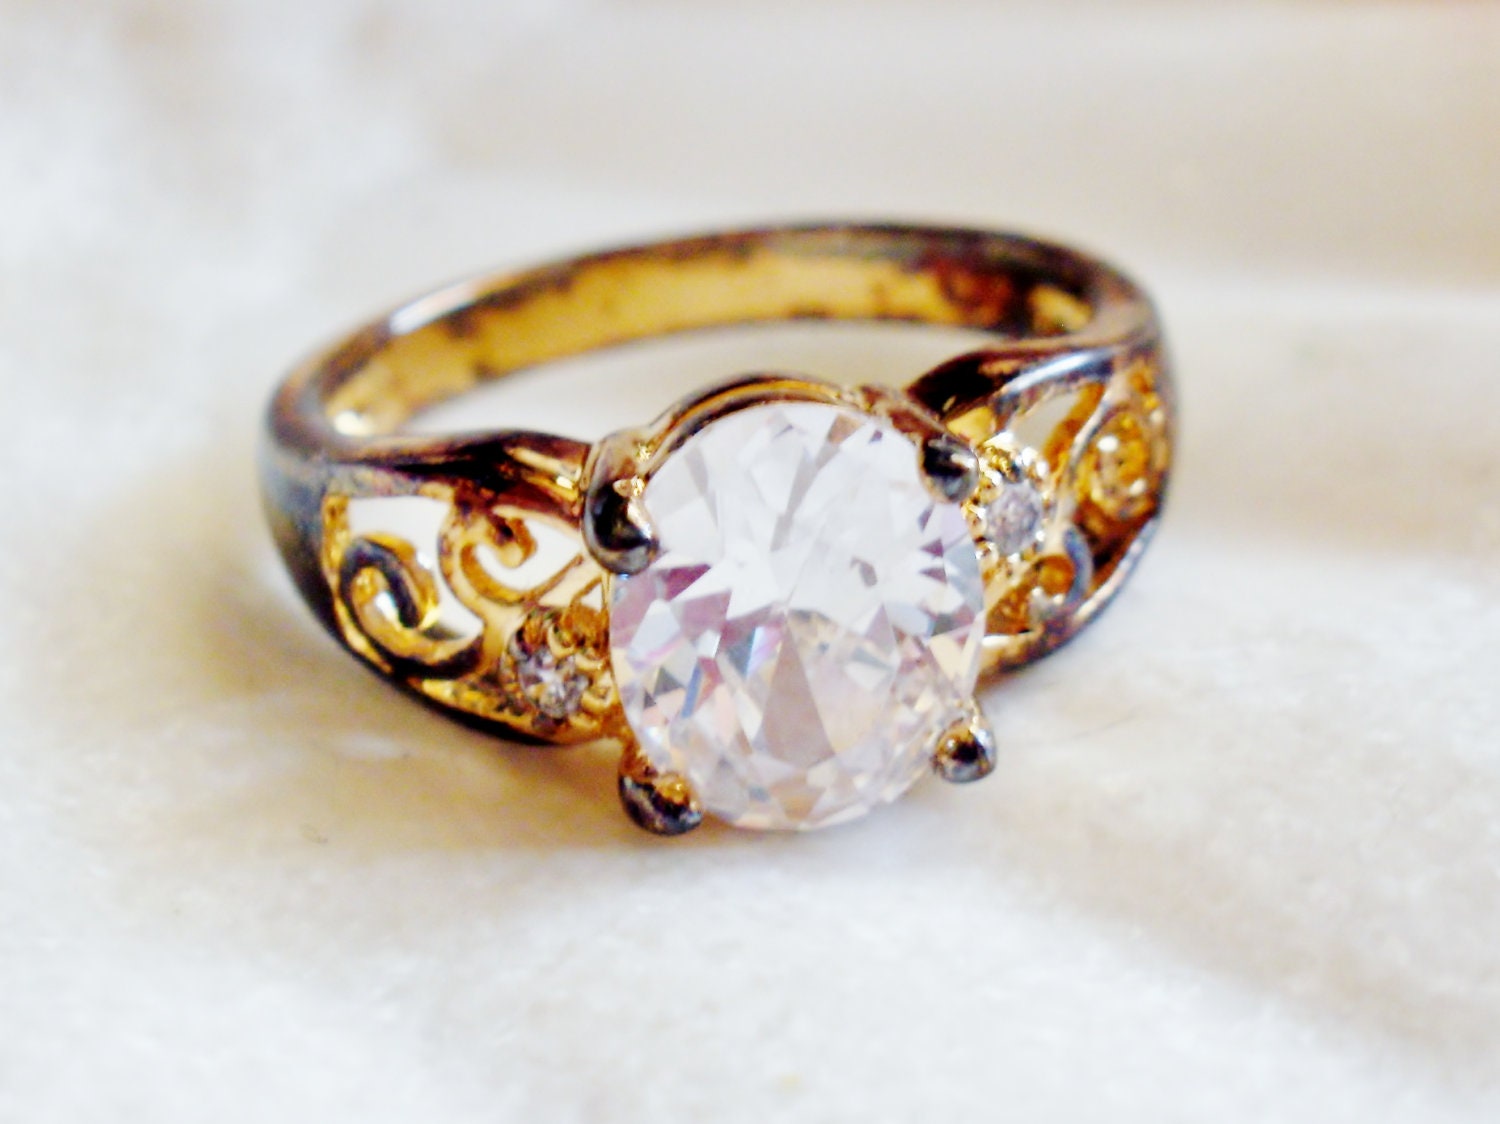 Faux Diamond Engagement Rings on Faux Diamond Engagement Ring Size 10 By Lilbooker On Etsy